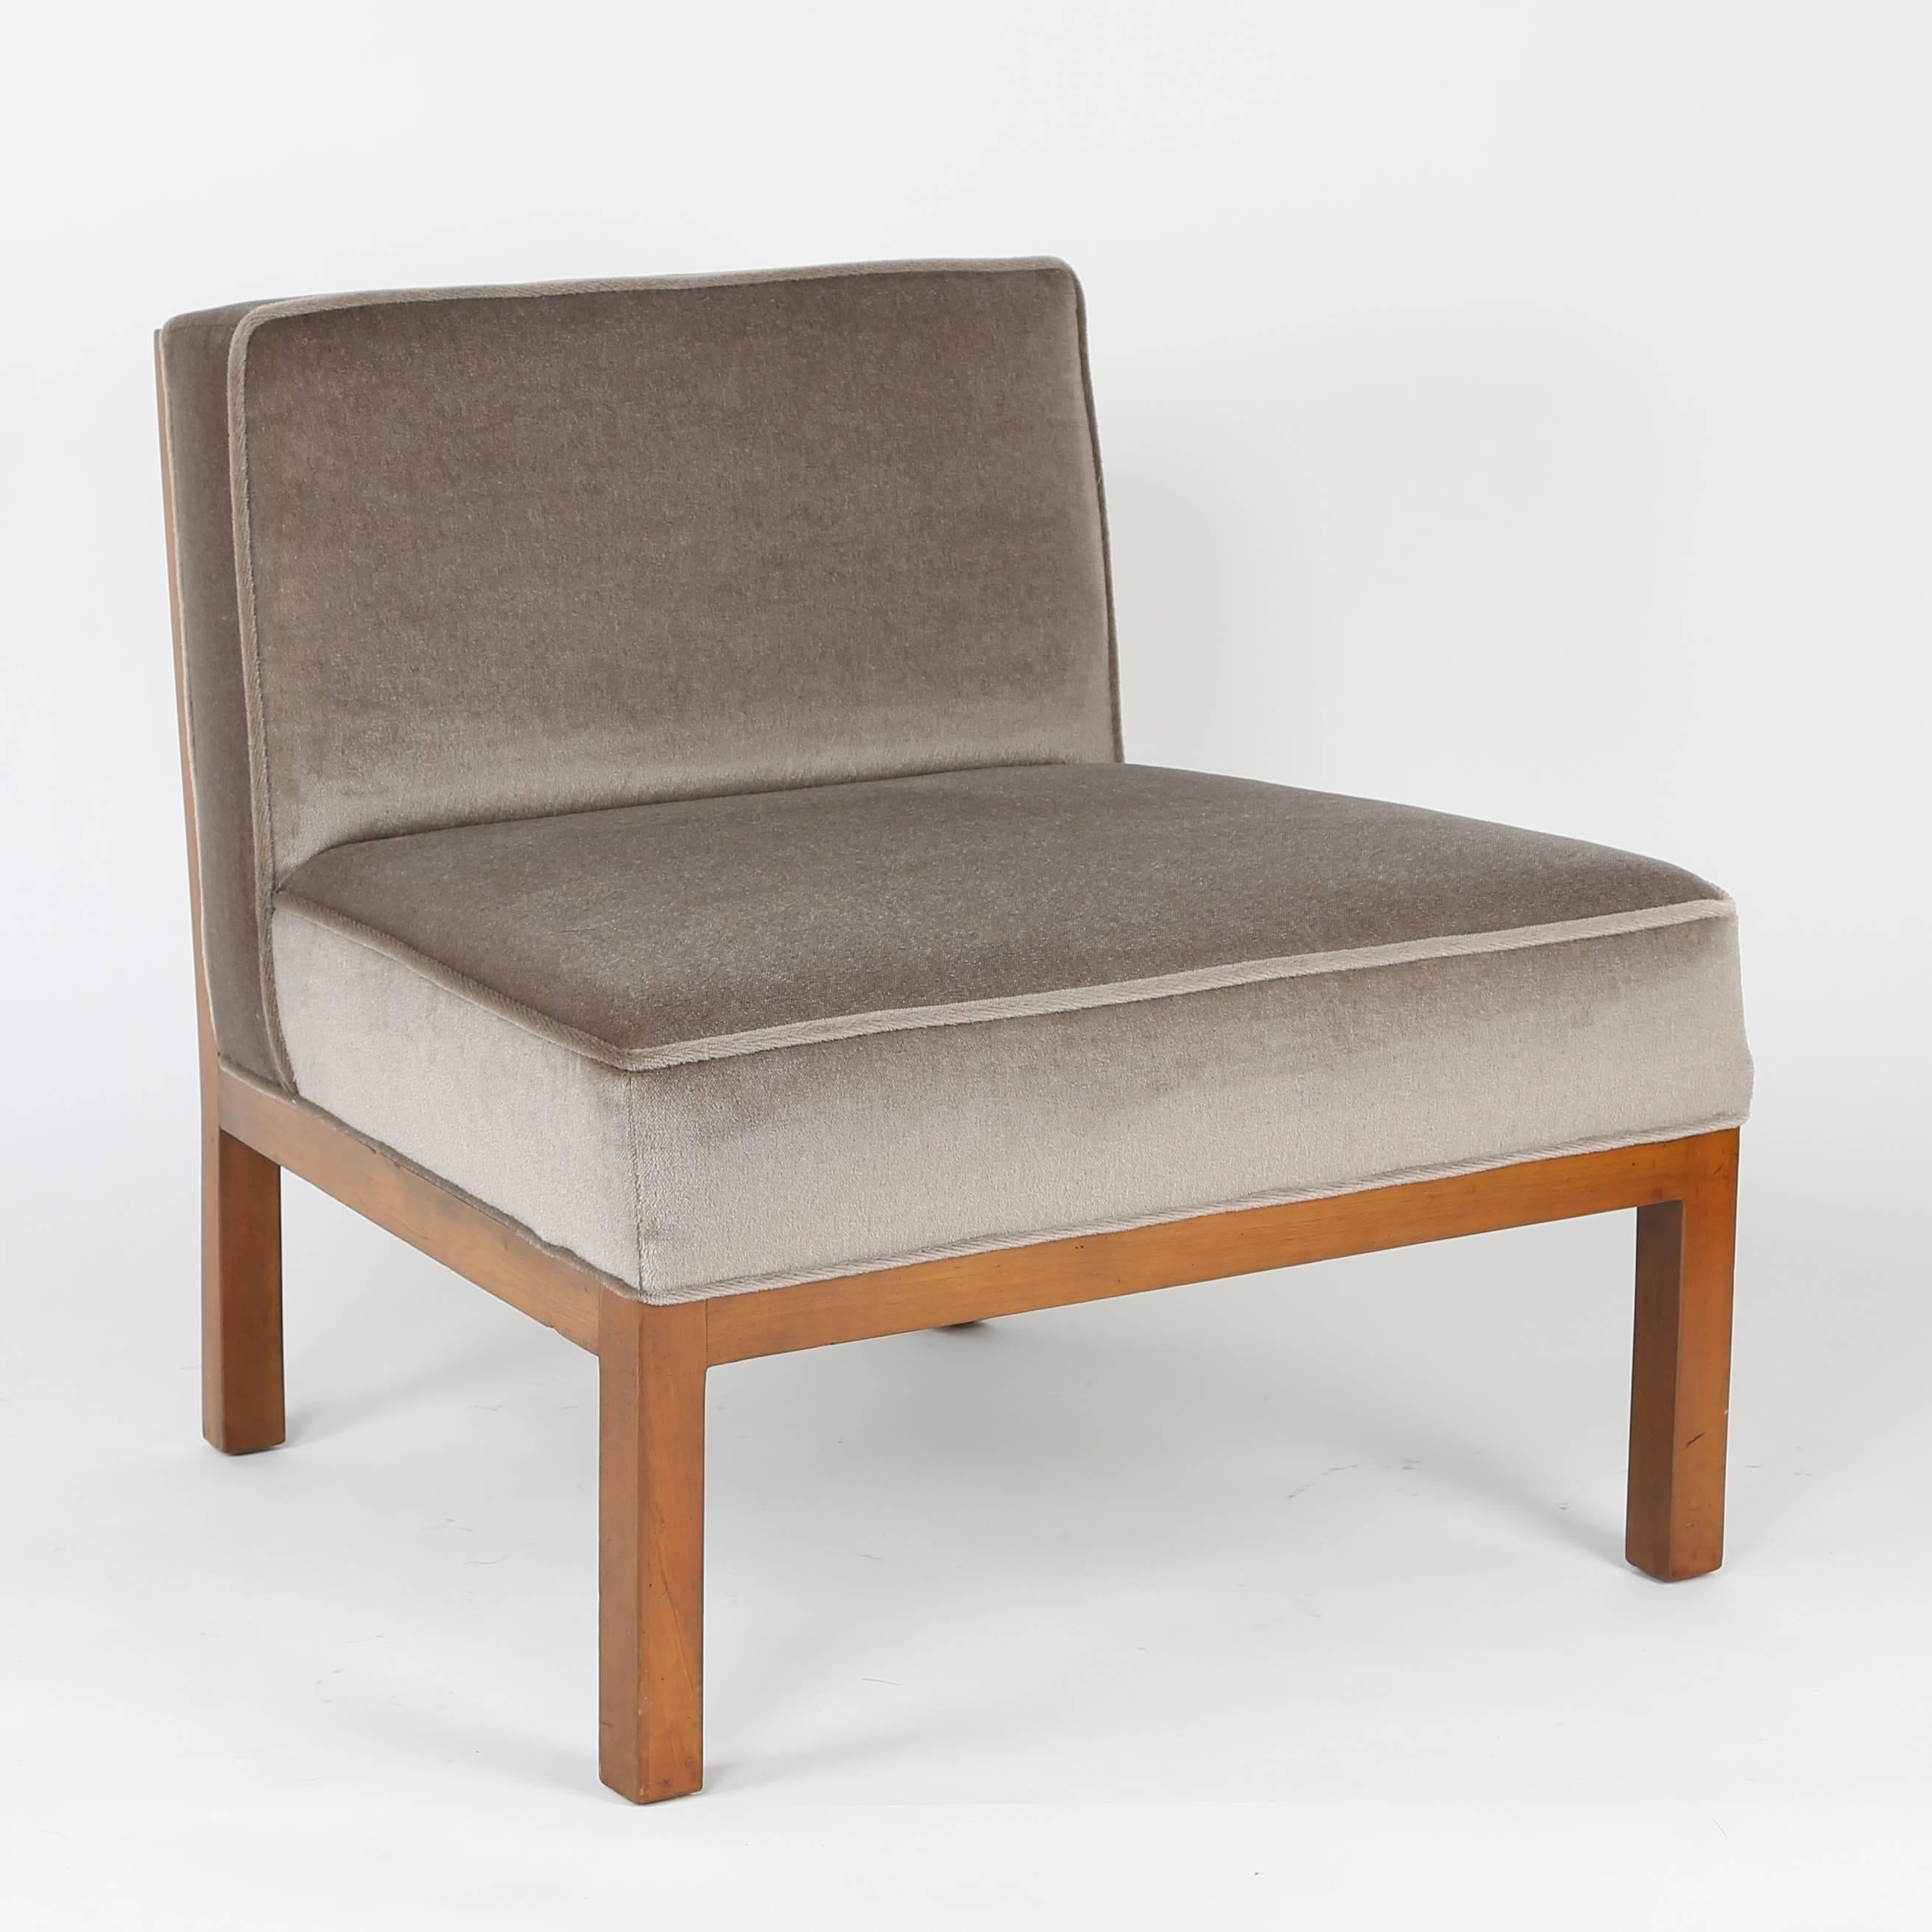 American Pair of Michael Taylor for Baker Slipper Chairs, circa 1960s